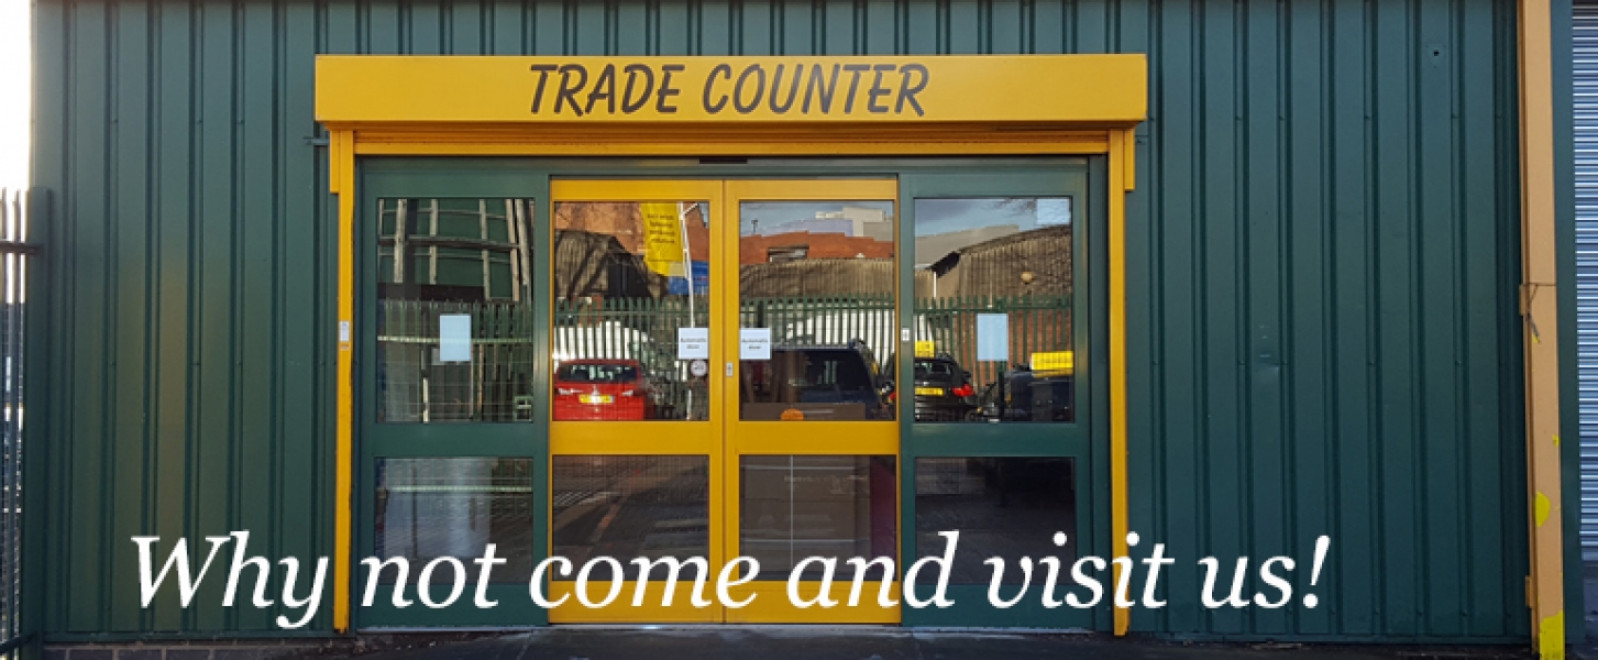 Trade Counter Opening.